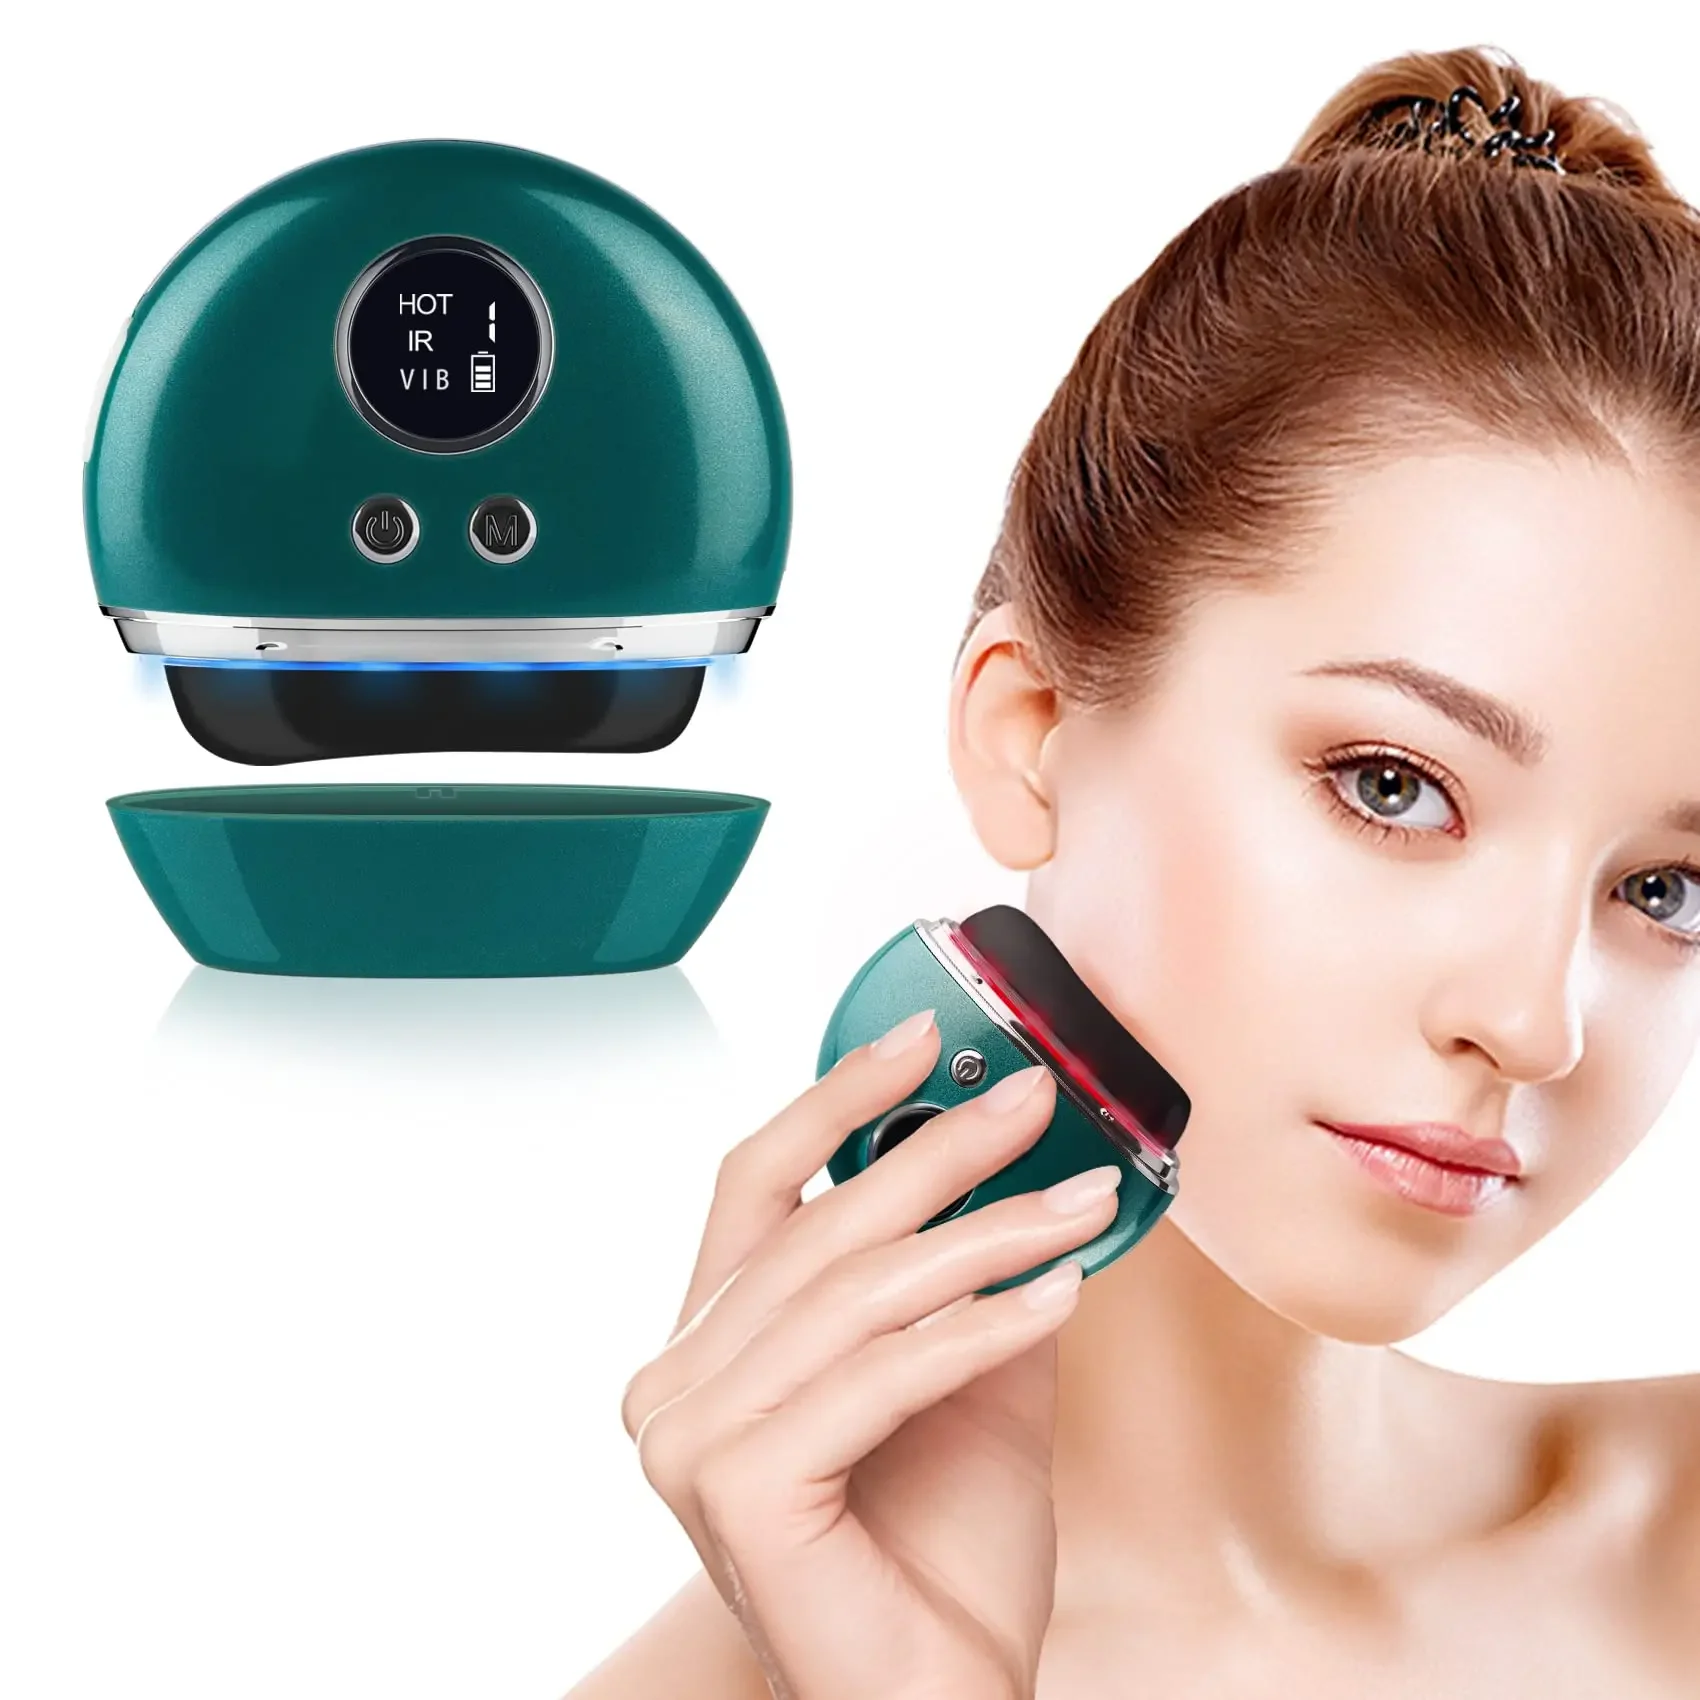 Gua Sha Facial Tools, Multifunction Face Sculpting Tool Face Lift Device Gua sha Massage Tool for Face with Heating & Vibration( kaemeasu laser rangefinder telescope multifunction laser distance meter with flag lock vibration slope compensation